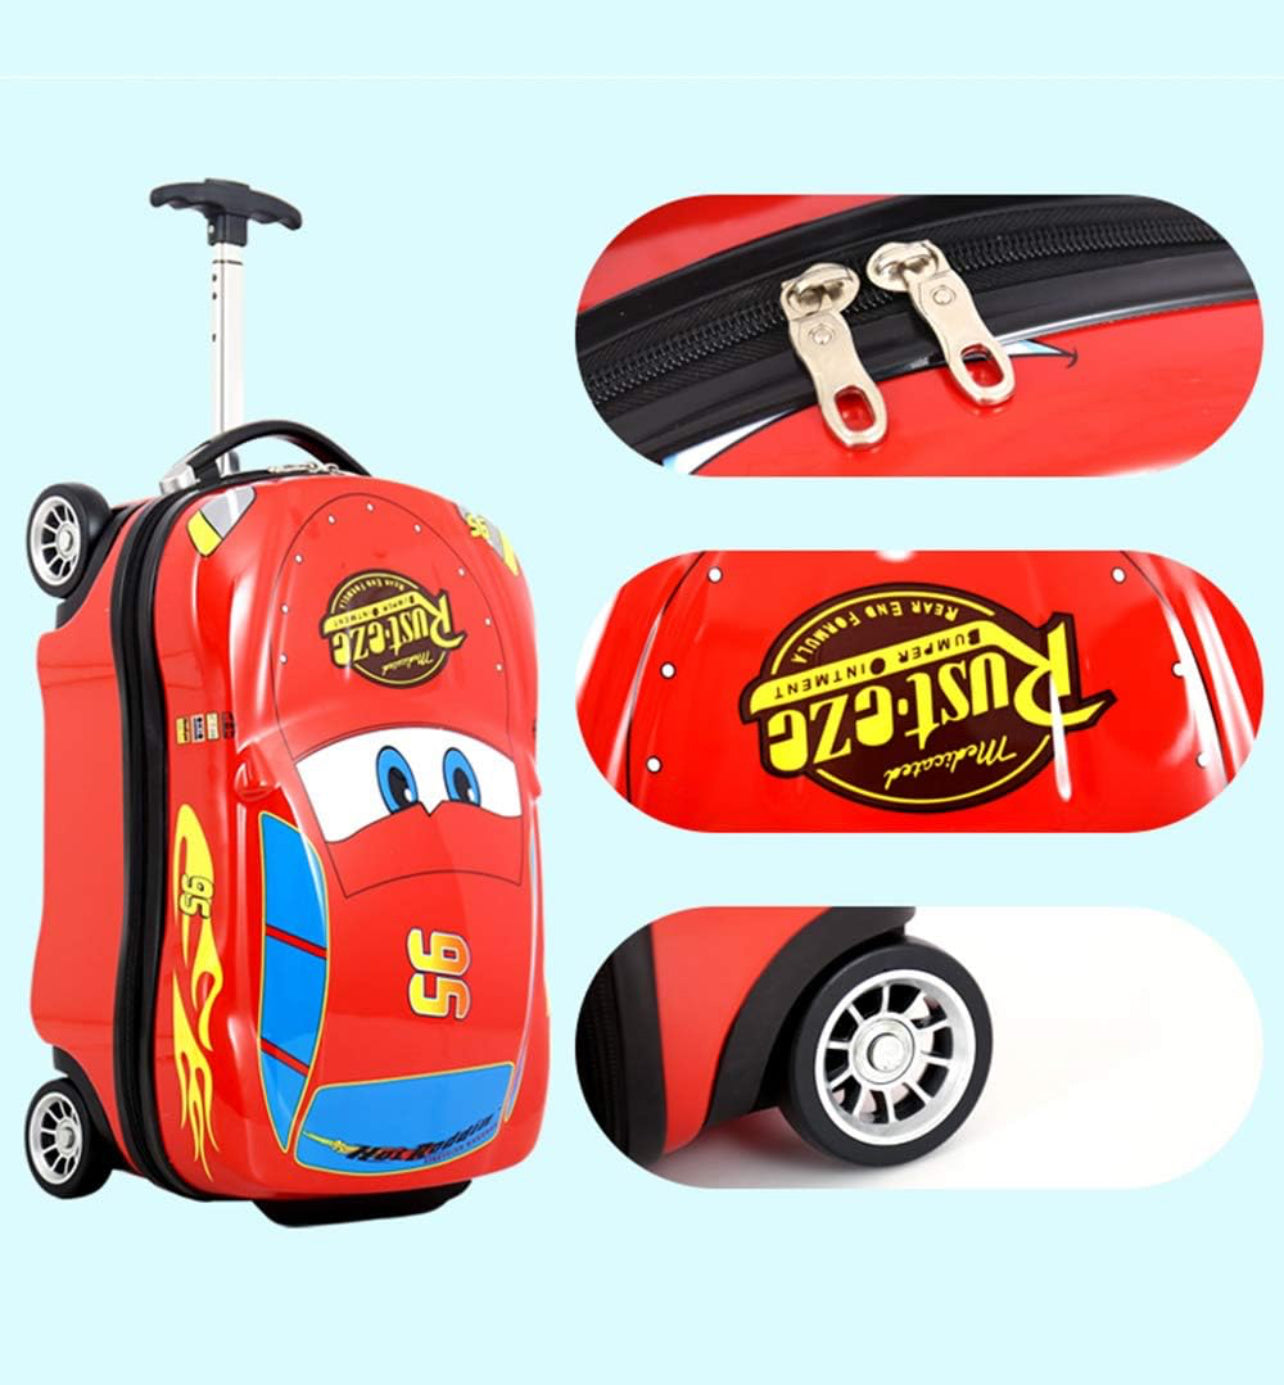 Wheels on the Go - A Mini Car that carry all your Travel Essentials !!